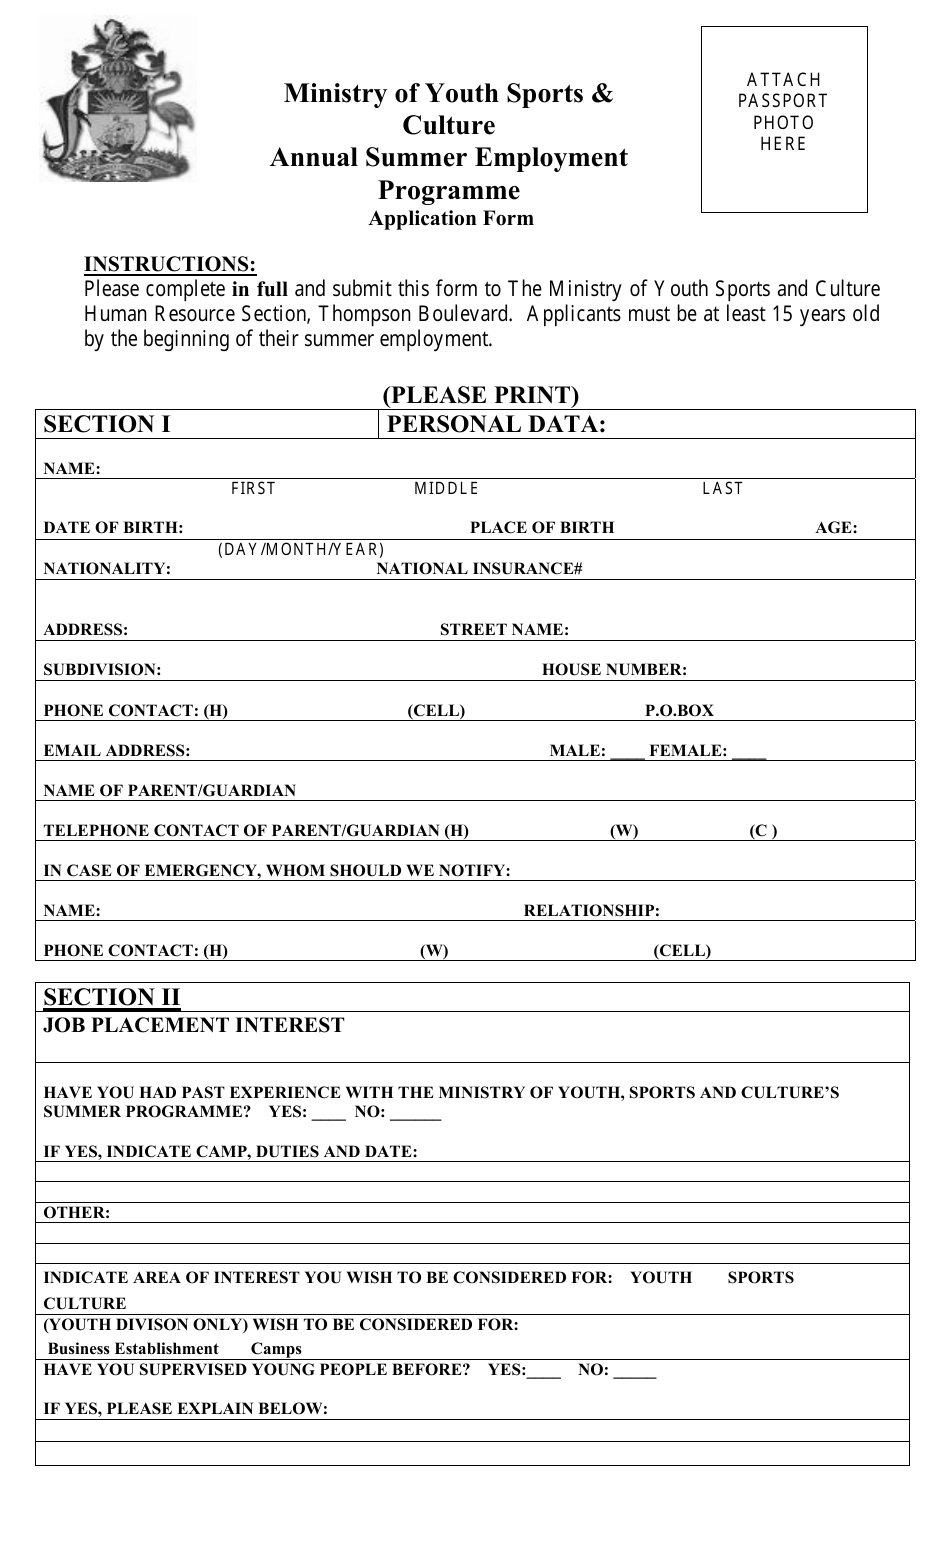 Annual Summer Employment Programme Application Form - Bahamas, Page 1